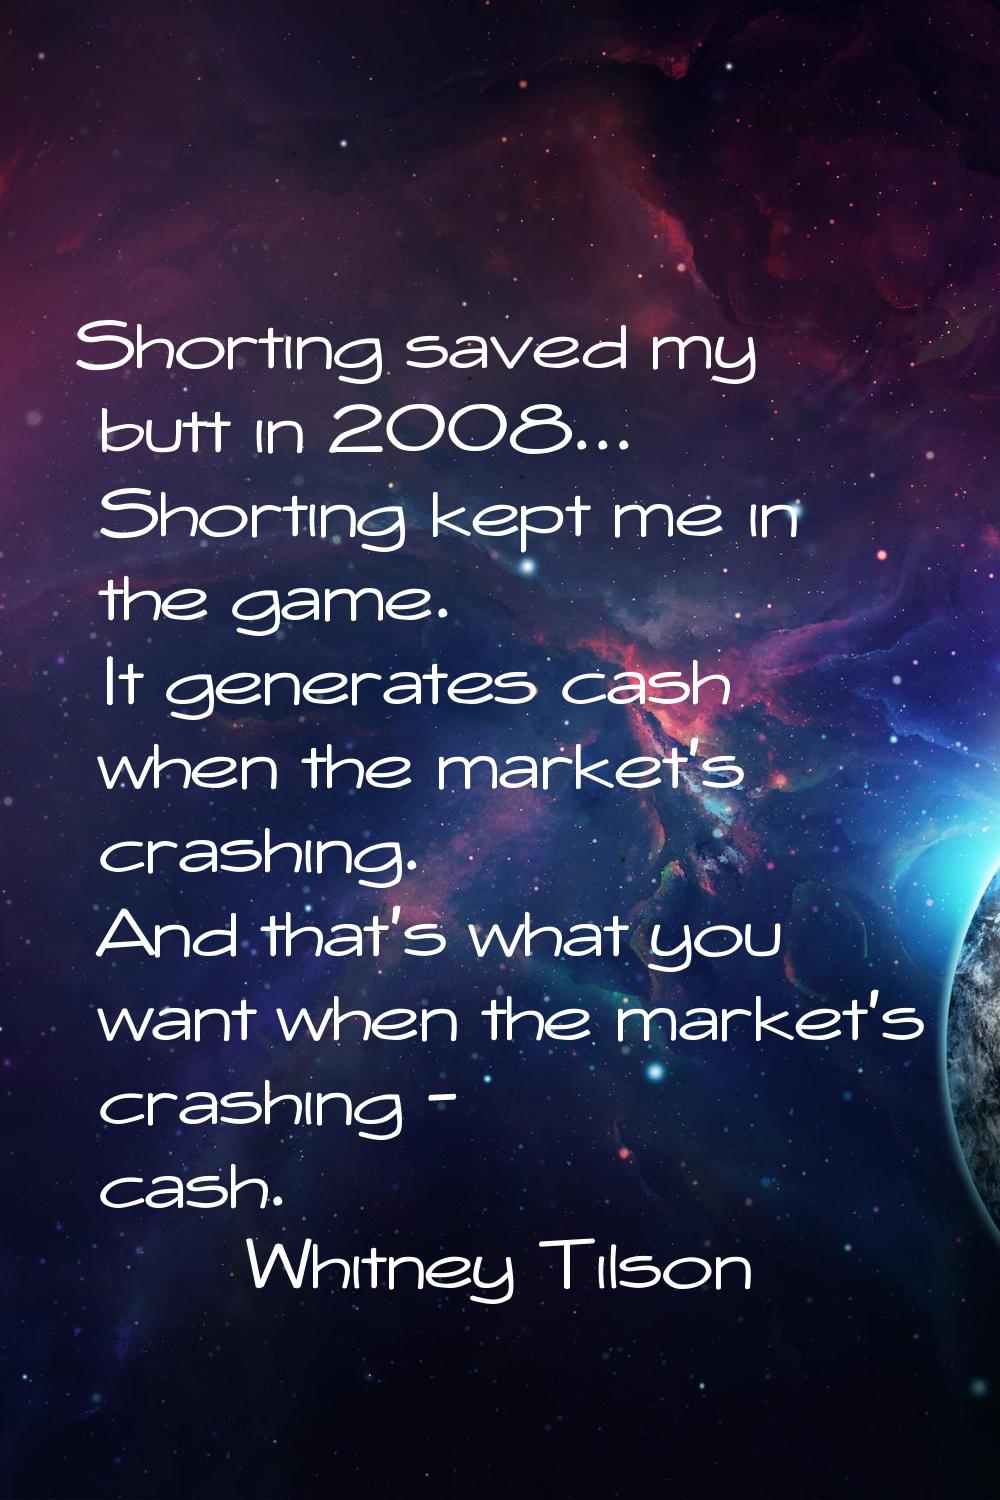 Shorting saved my butt in 2008... Shorting kept me in the game. It generates cash when the market's